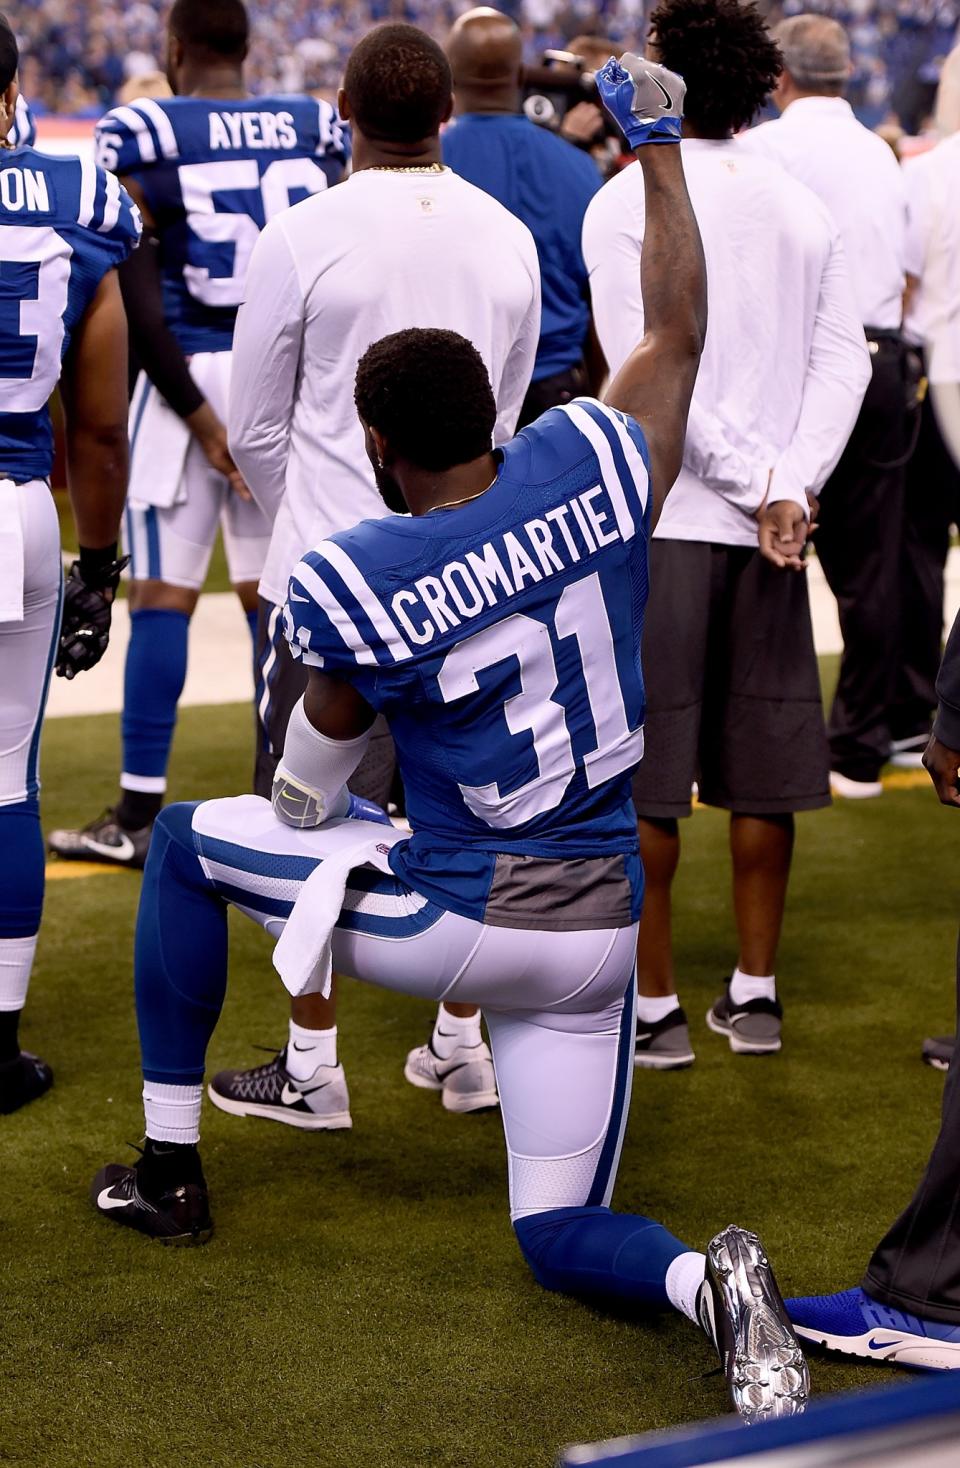 <p>Antonio Cromartie #31 of the Indianapolis Colts kneels and raises his fist during the National Anthem before the game against the San Diego Chargers at Lucas Oil Stadium on September 25, 2016 in Indianapolis, Indiana. (Photo by Stacy Revere/Getty Images) </p>